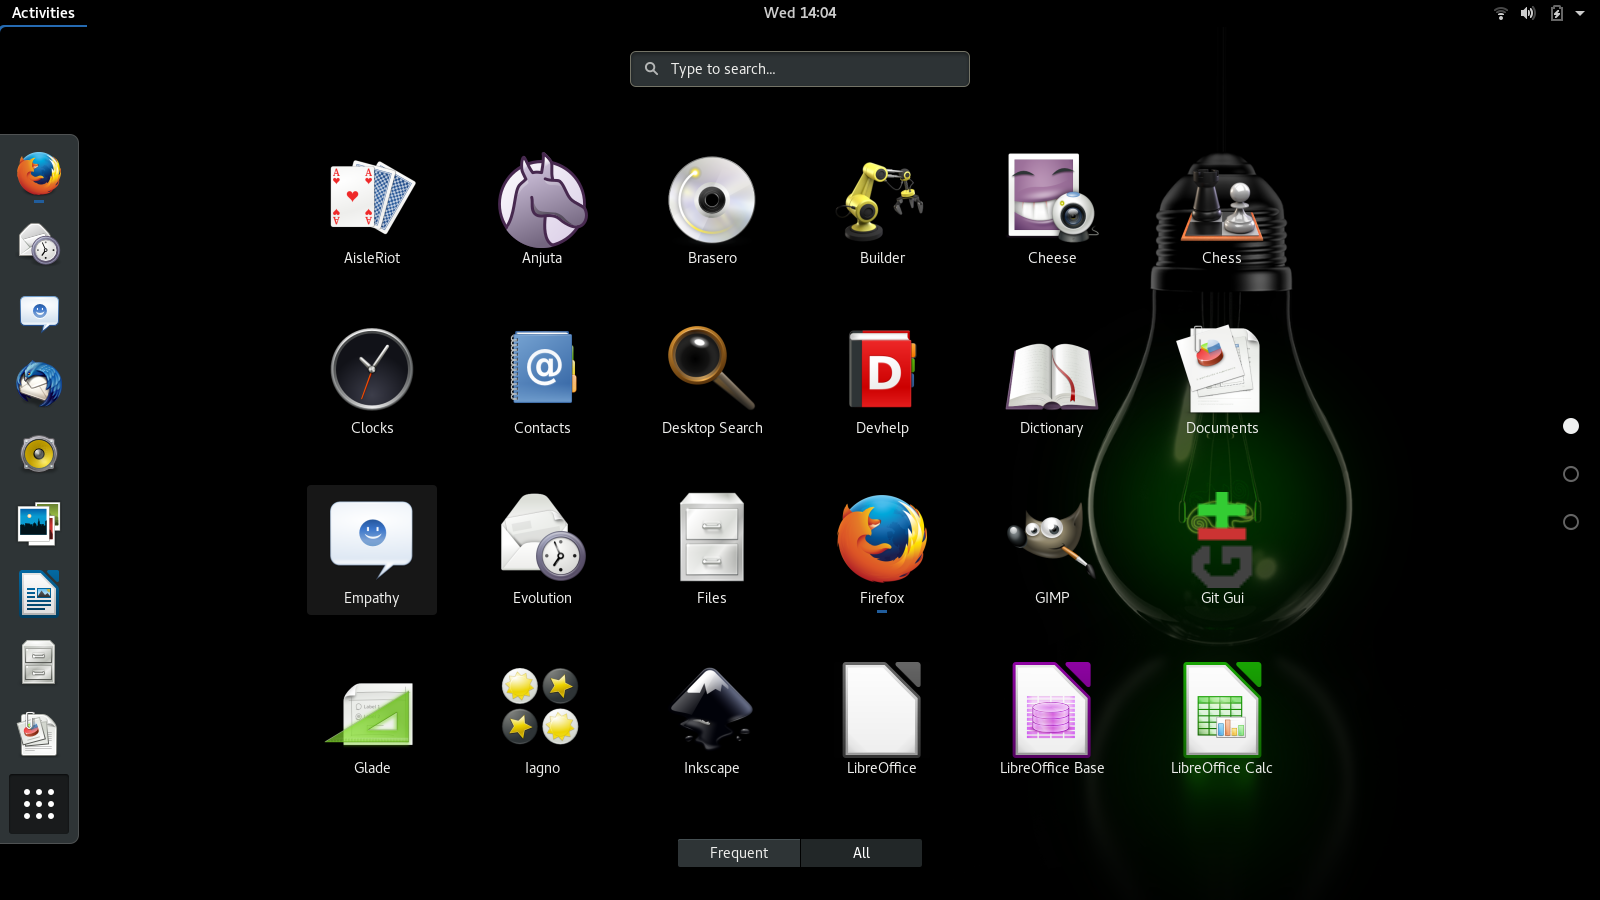 GNOME applications overview 42.2.png